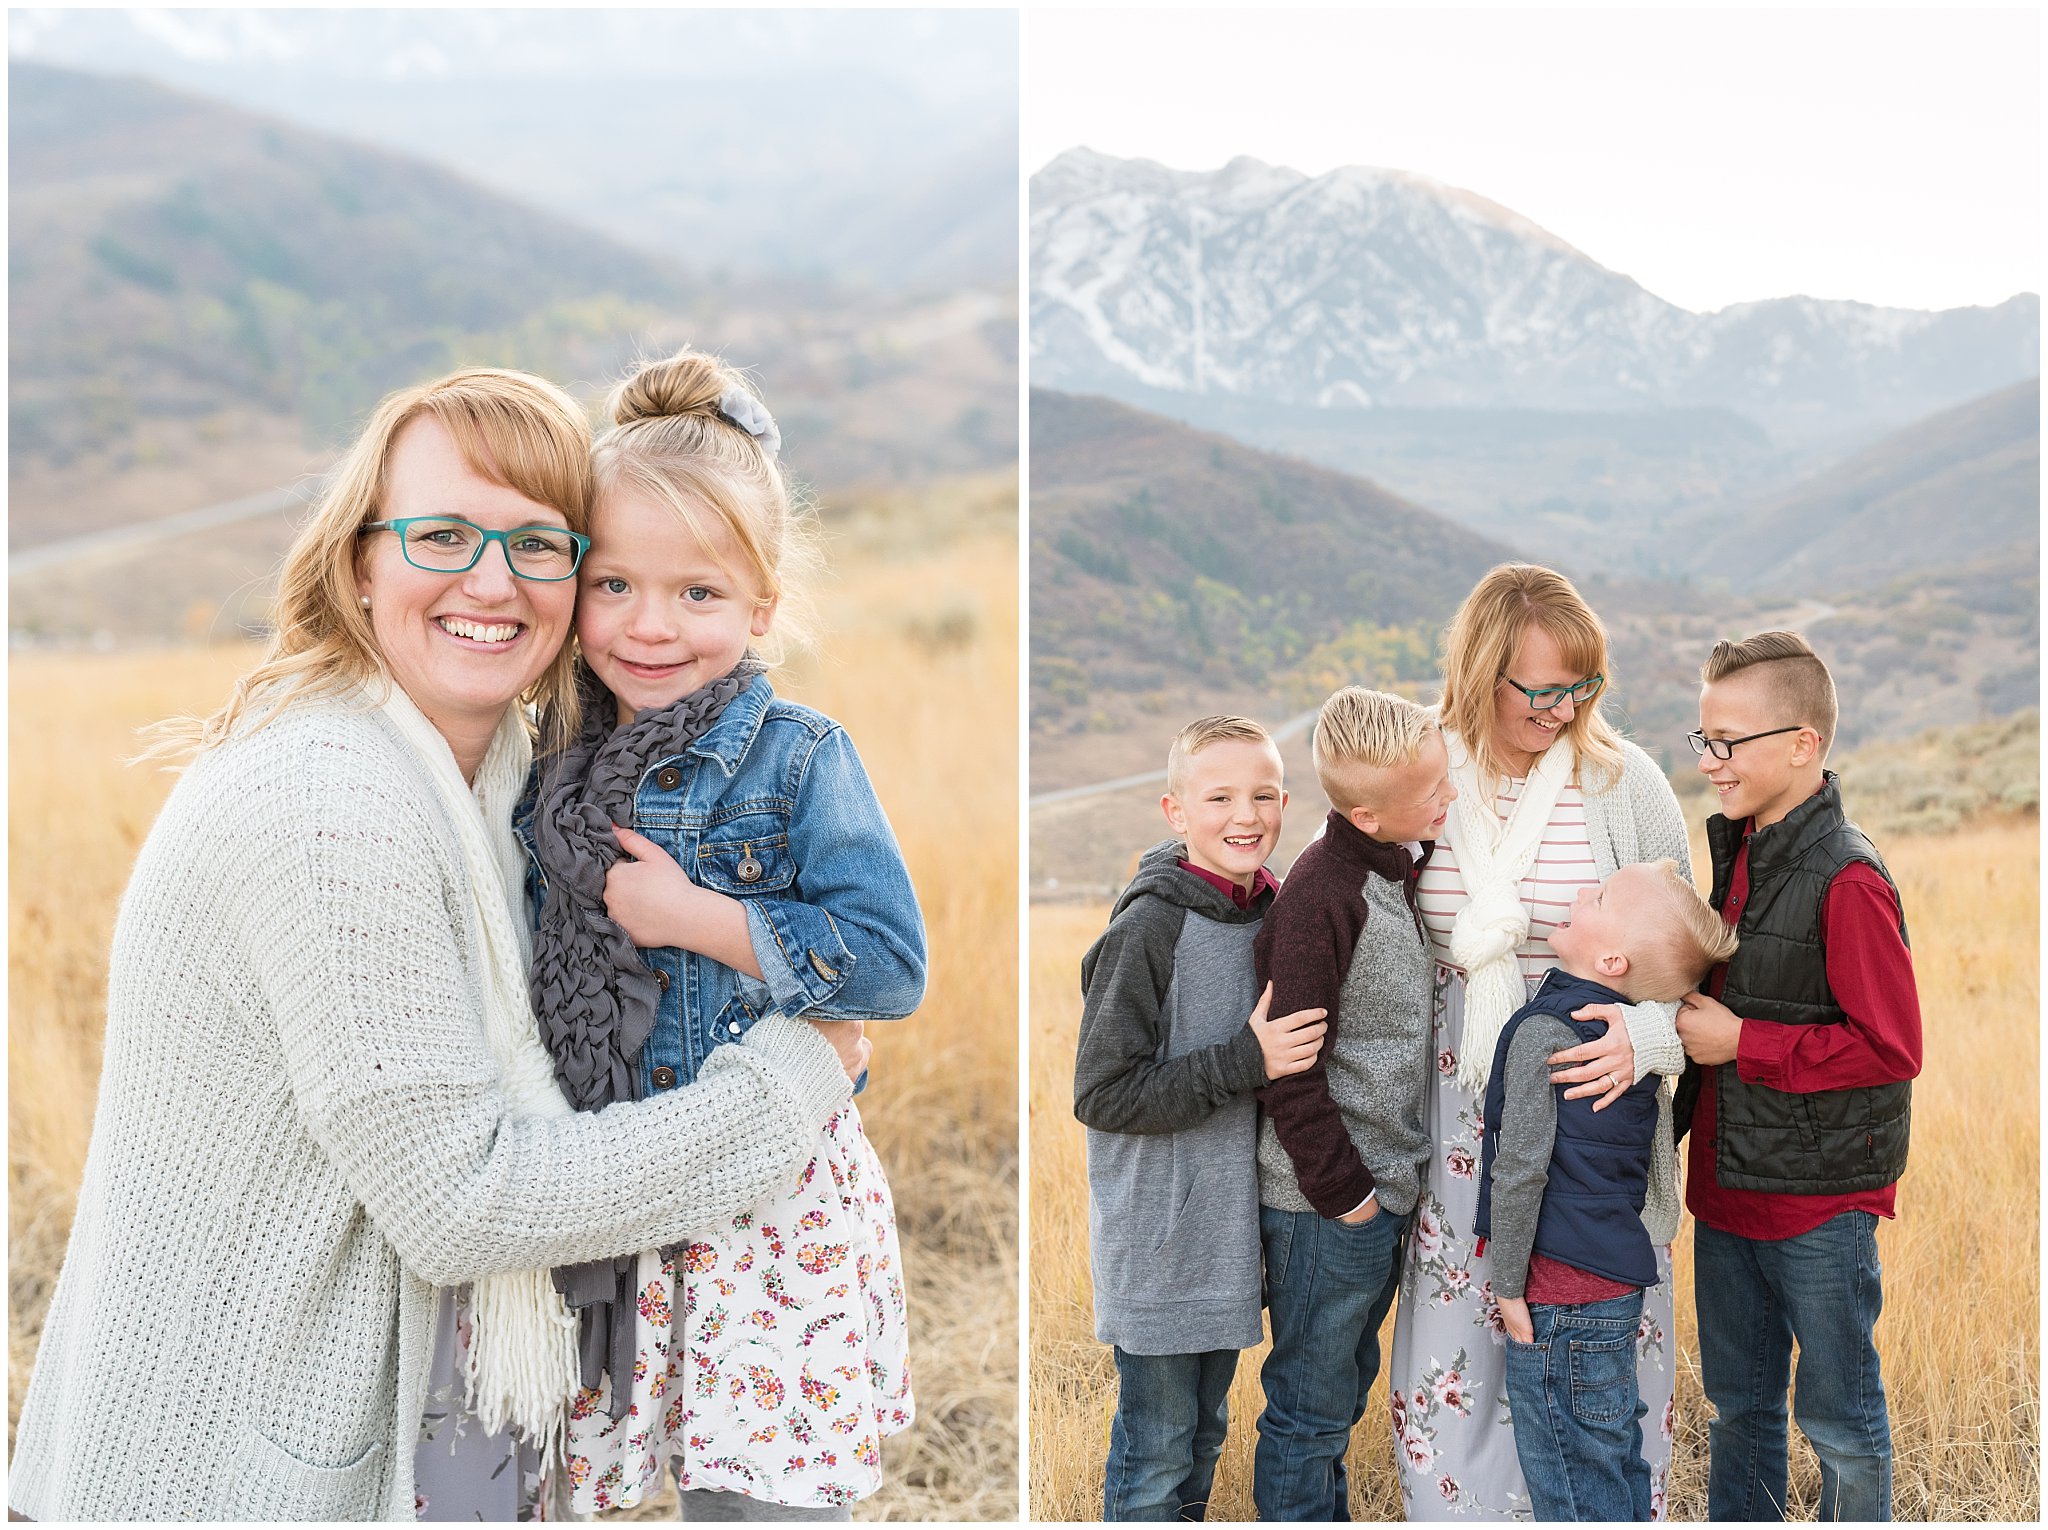 Mom with kids in the snowy mountains | Fall Family Pictures in the Mountains | Snowbasin, Utah | Jessie and Dallin Photography